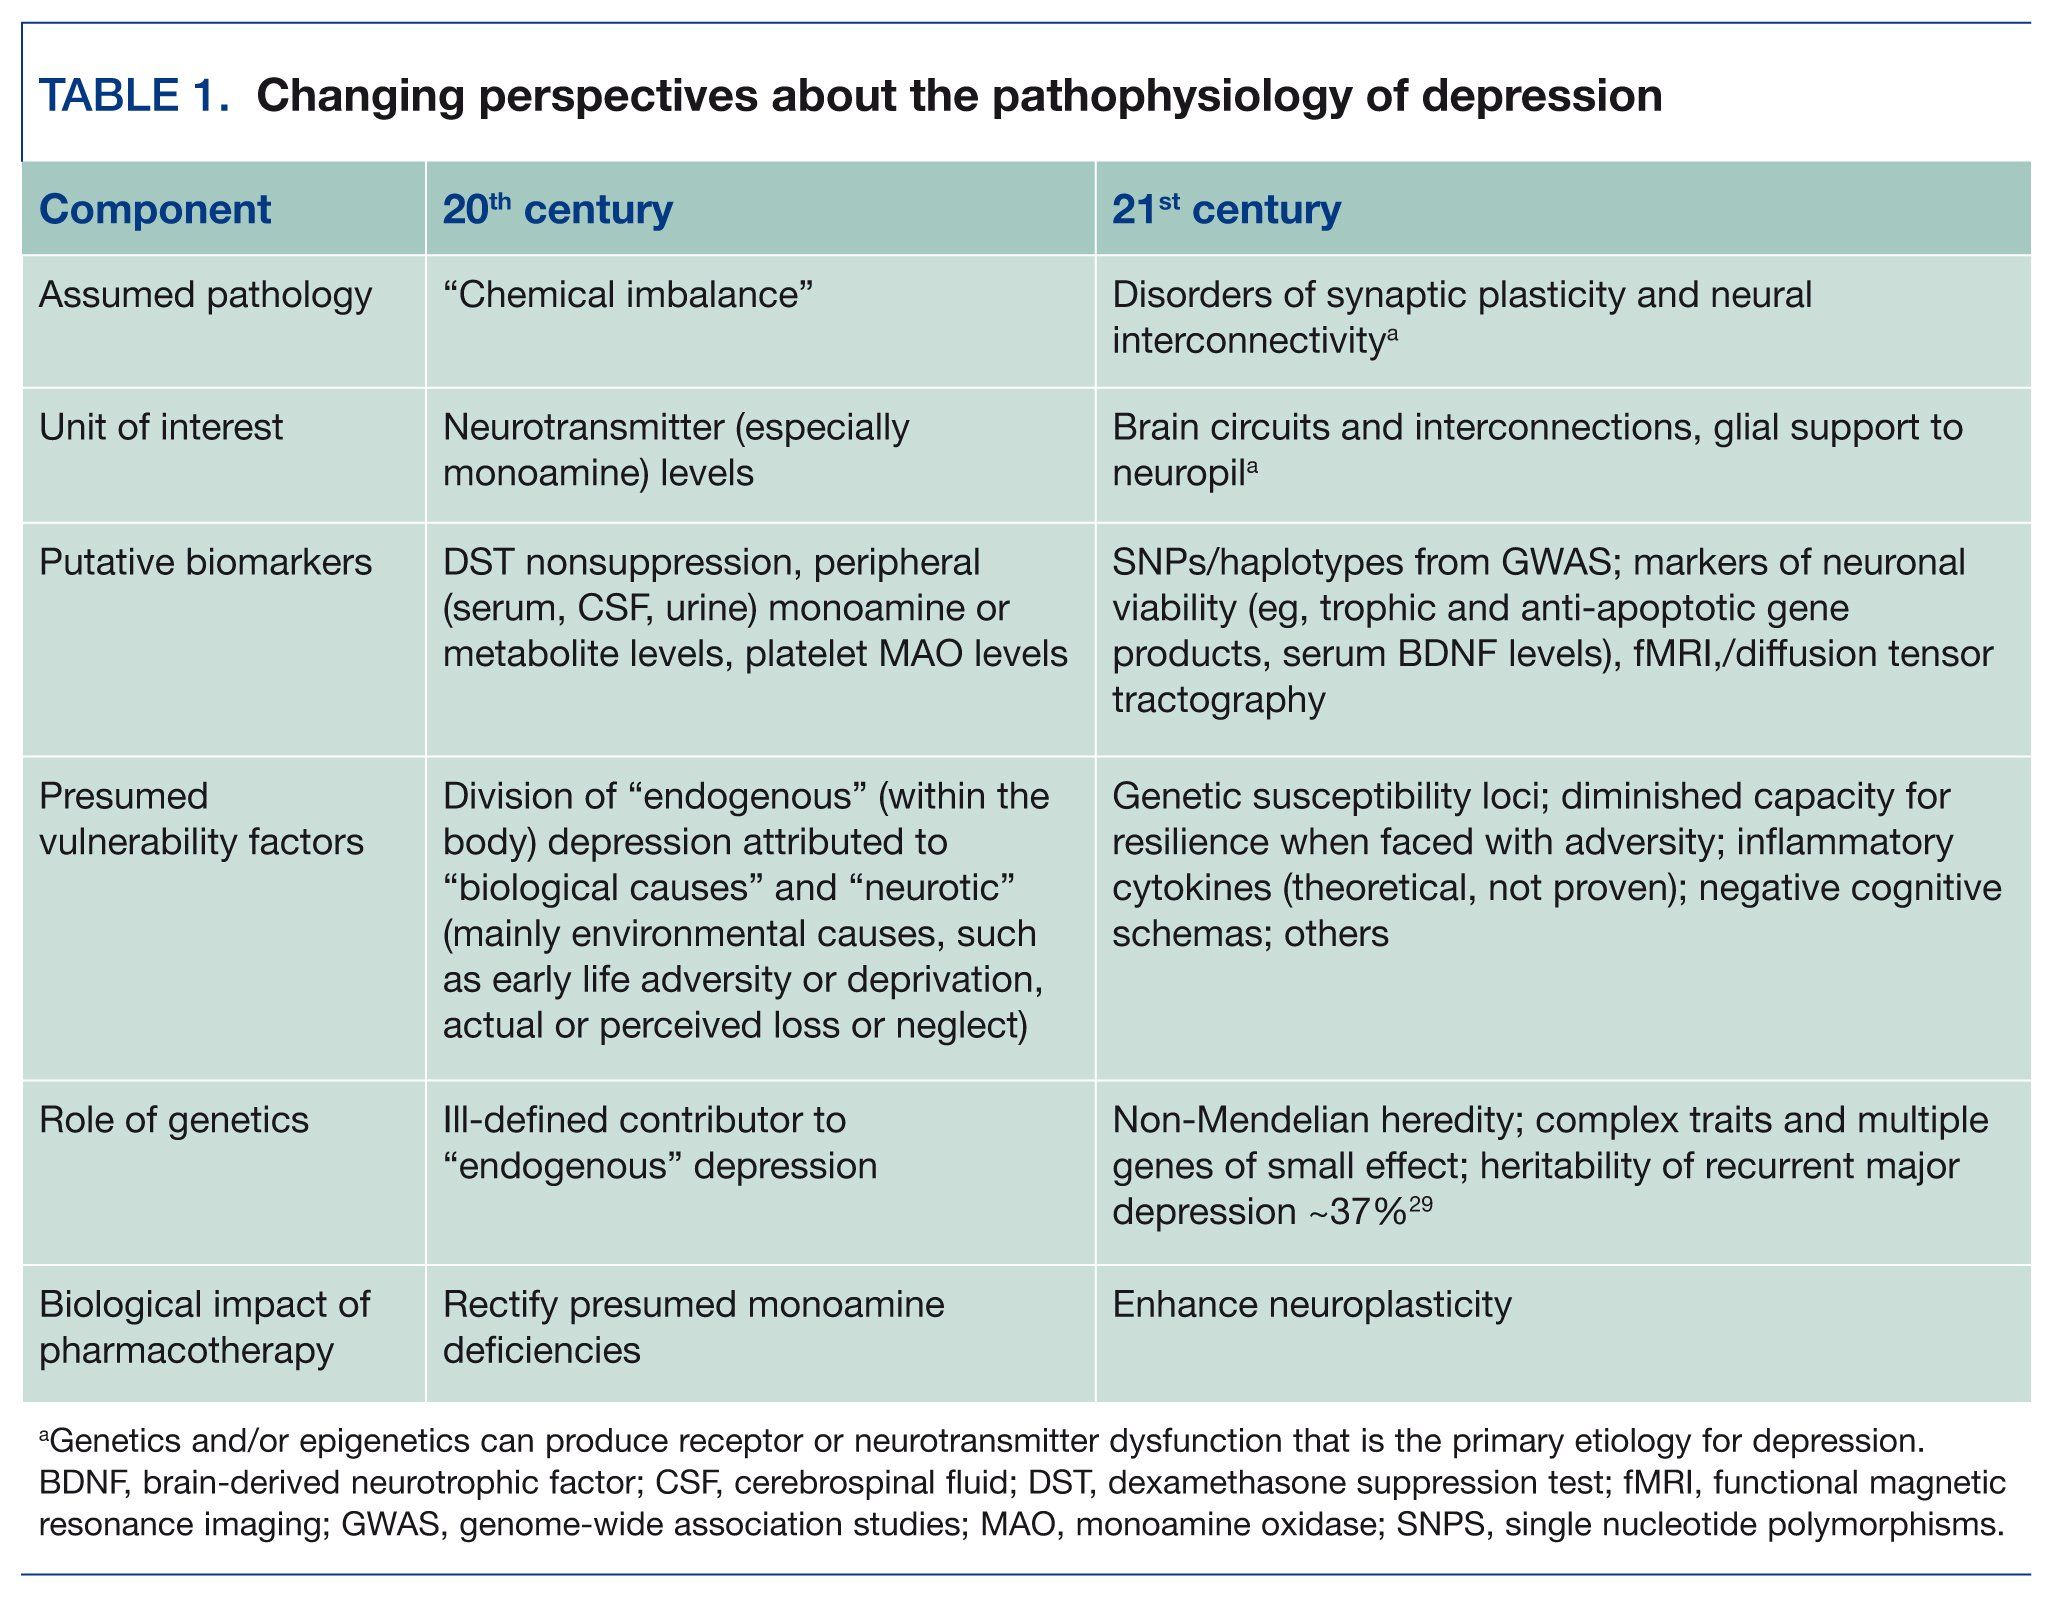 Changing perspectives about the pathophysiology of depression